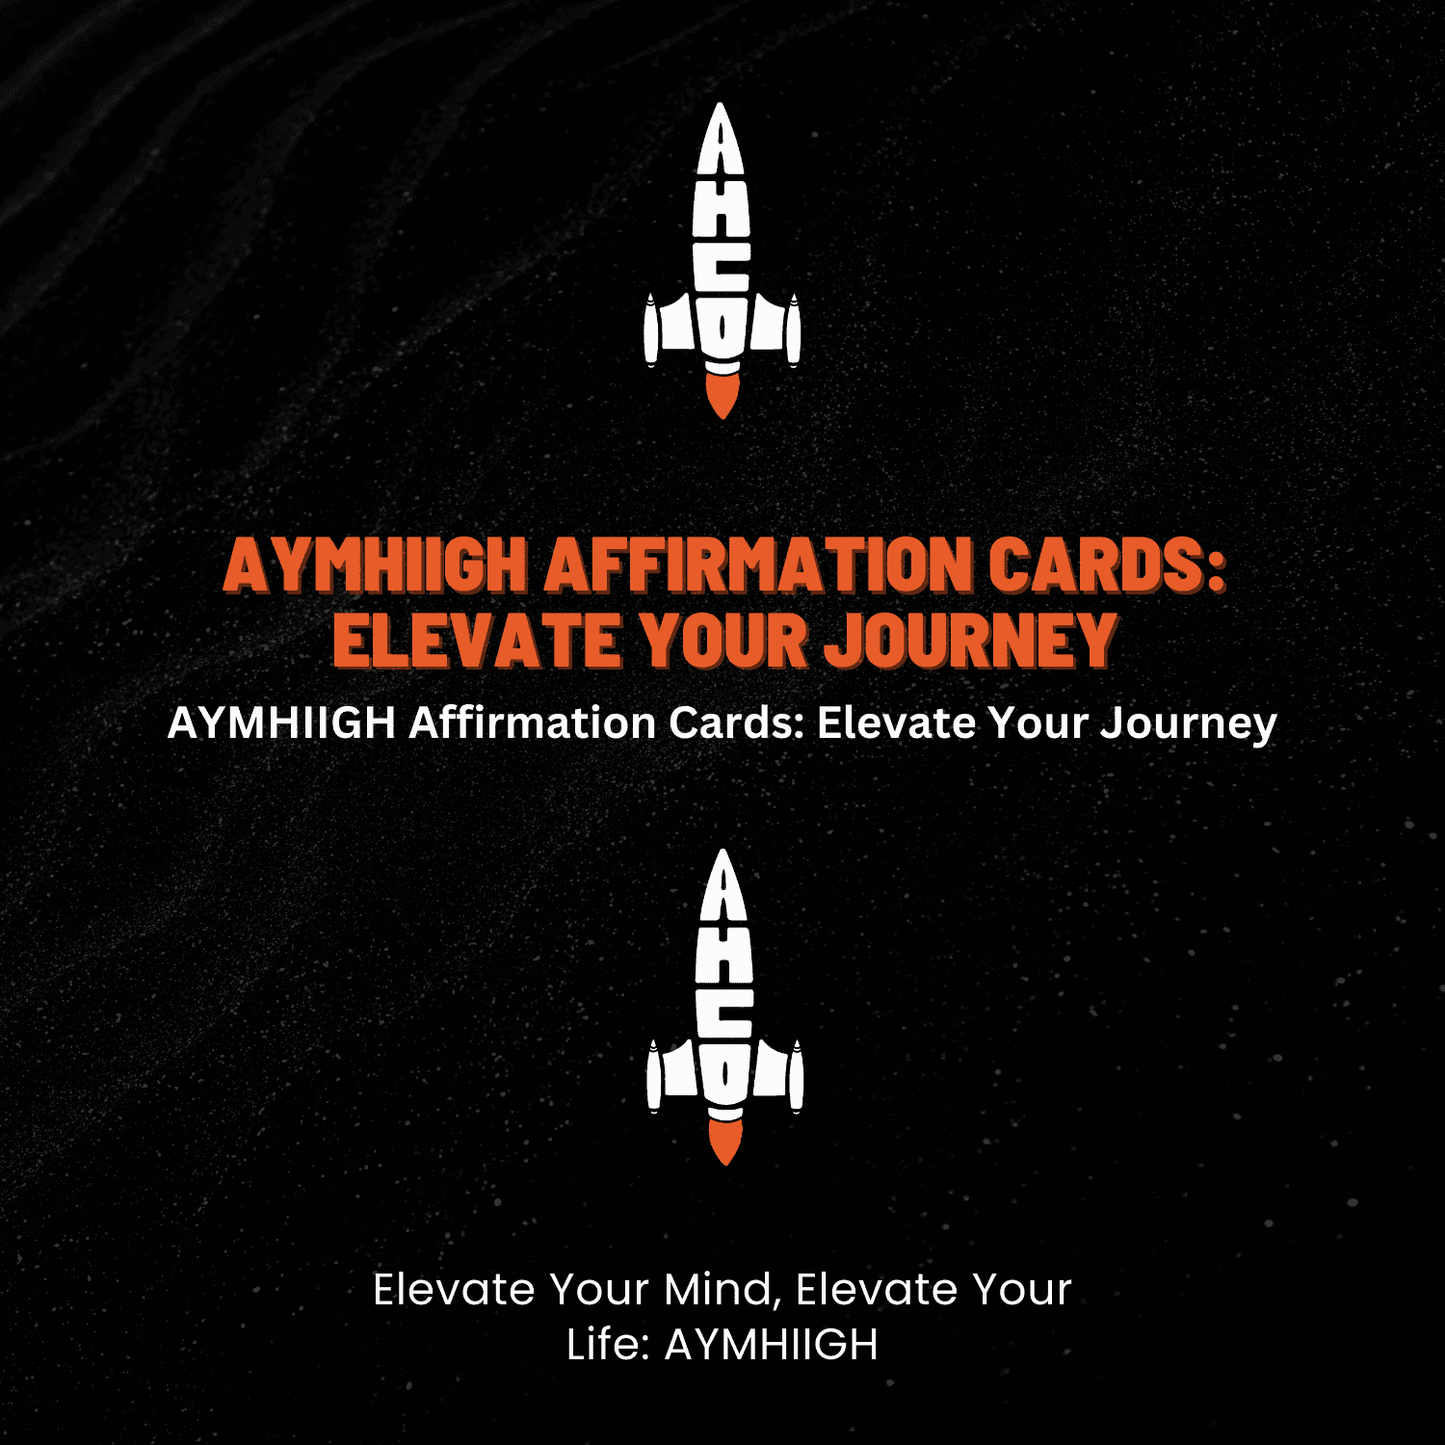 AYMHIIGH Affirmation Cards: Elevate Your Journey